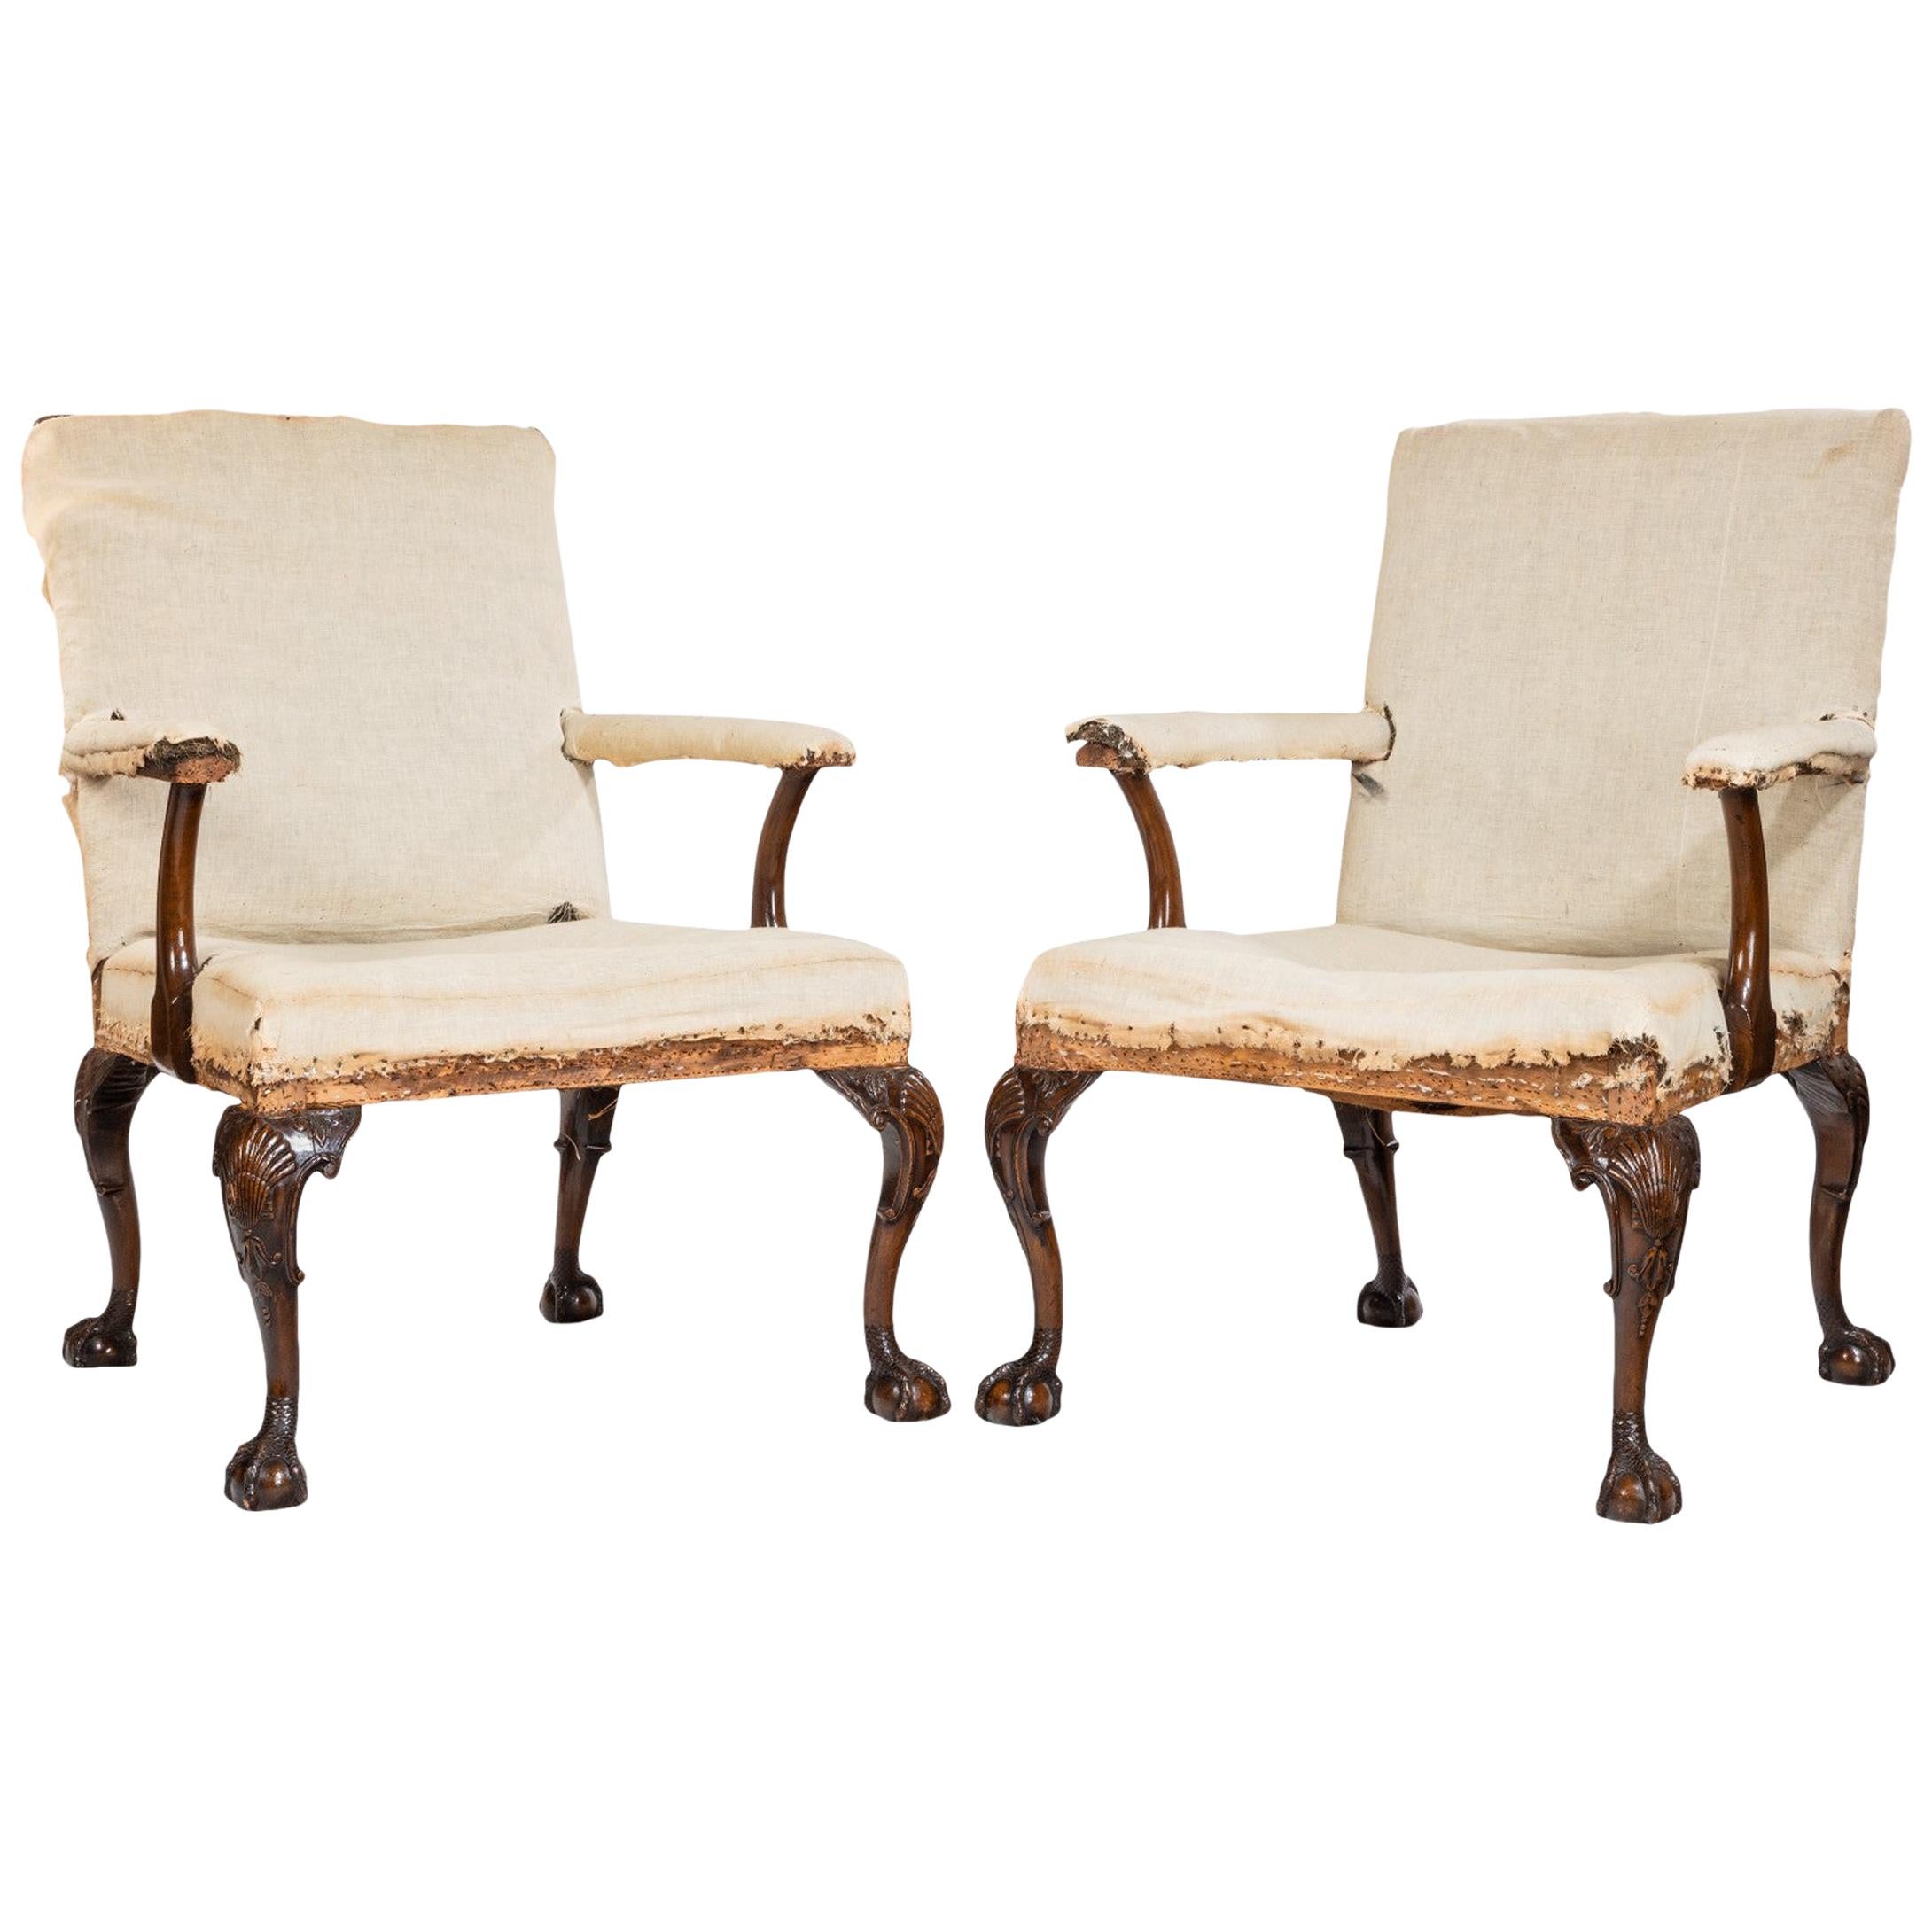 Pair of 19th Century George II Style Gainsborough Armchairs